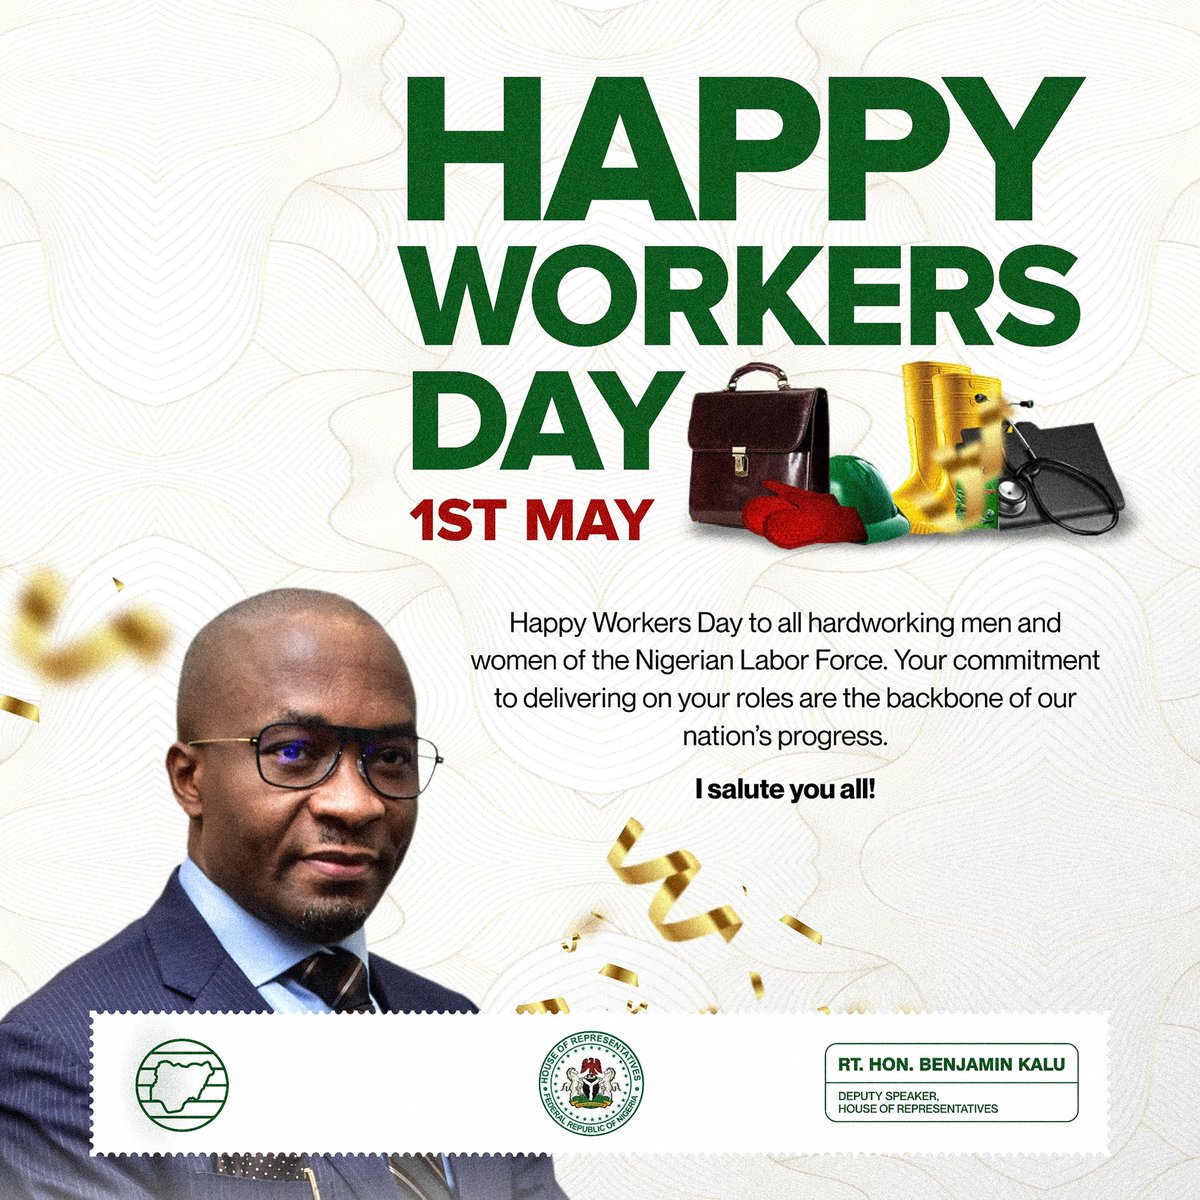 On this special day, I salute the hardworking men and women of the Nigerian labour force. Your invaluable contributions and dedication are the backbone of our nation’s progress. As we celebrate this International Workers’ Day, our commitment stands firm in prioritizing your…